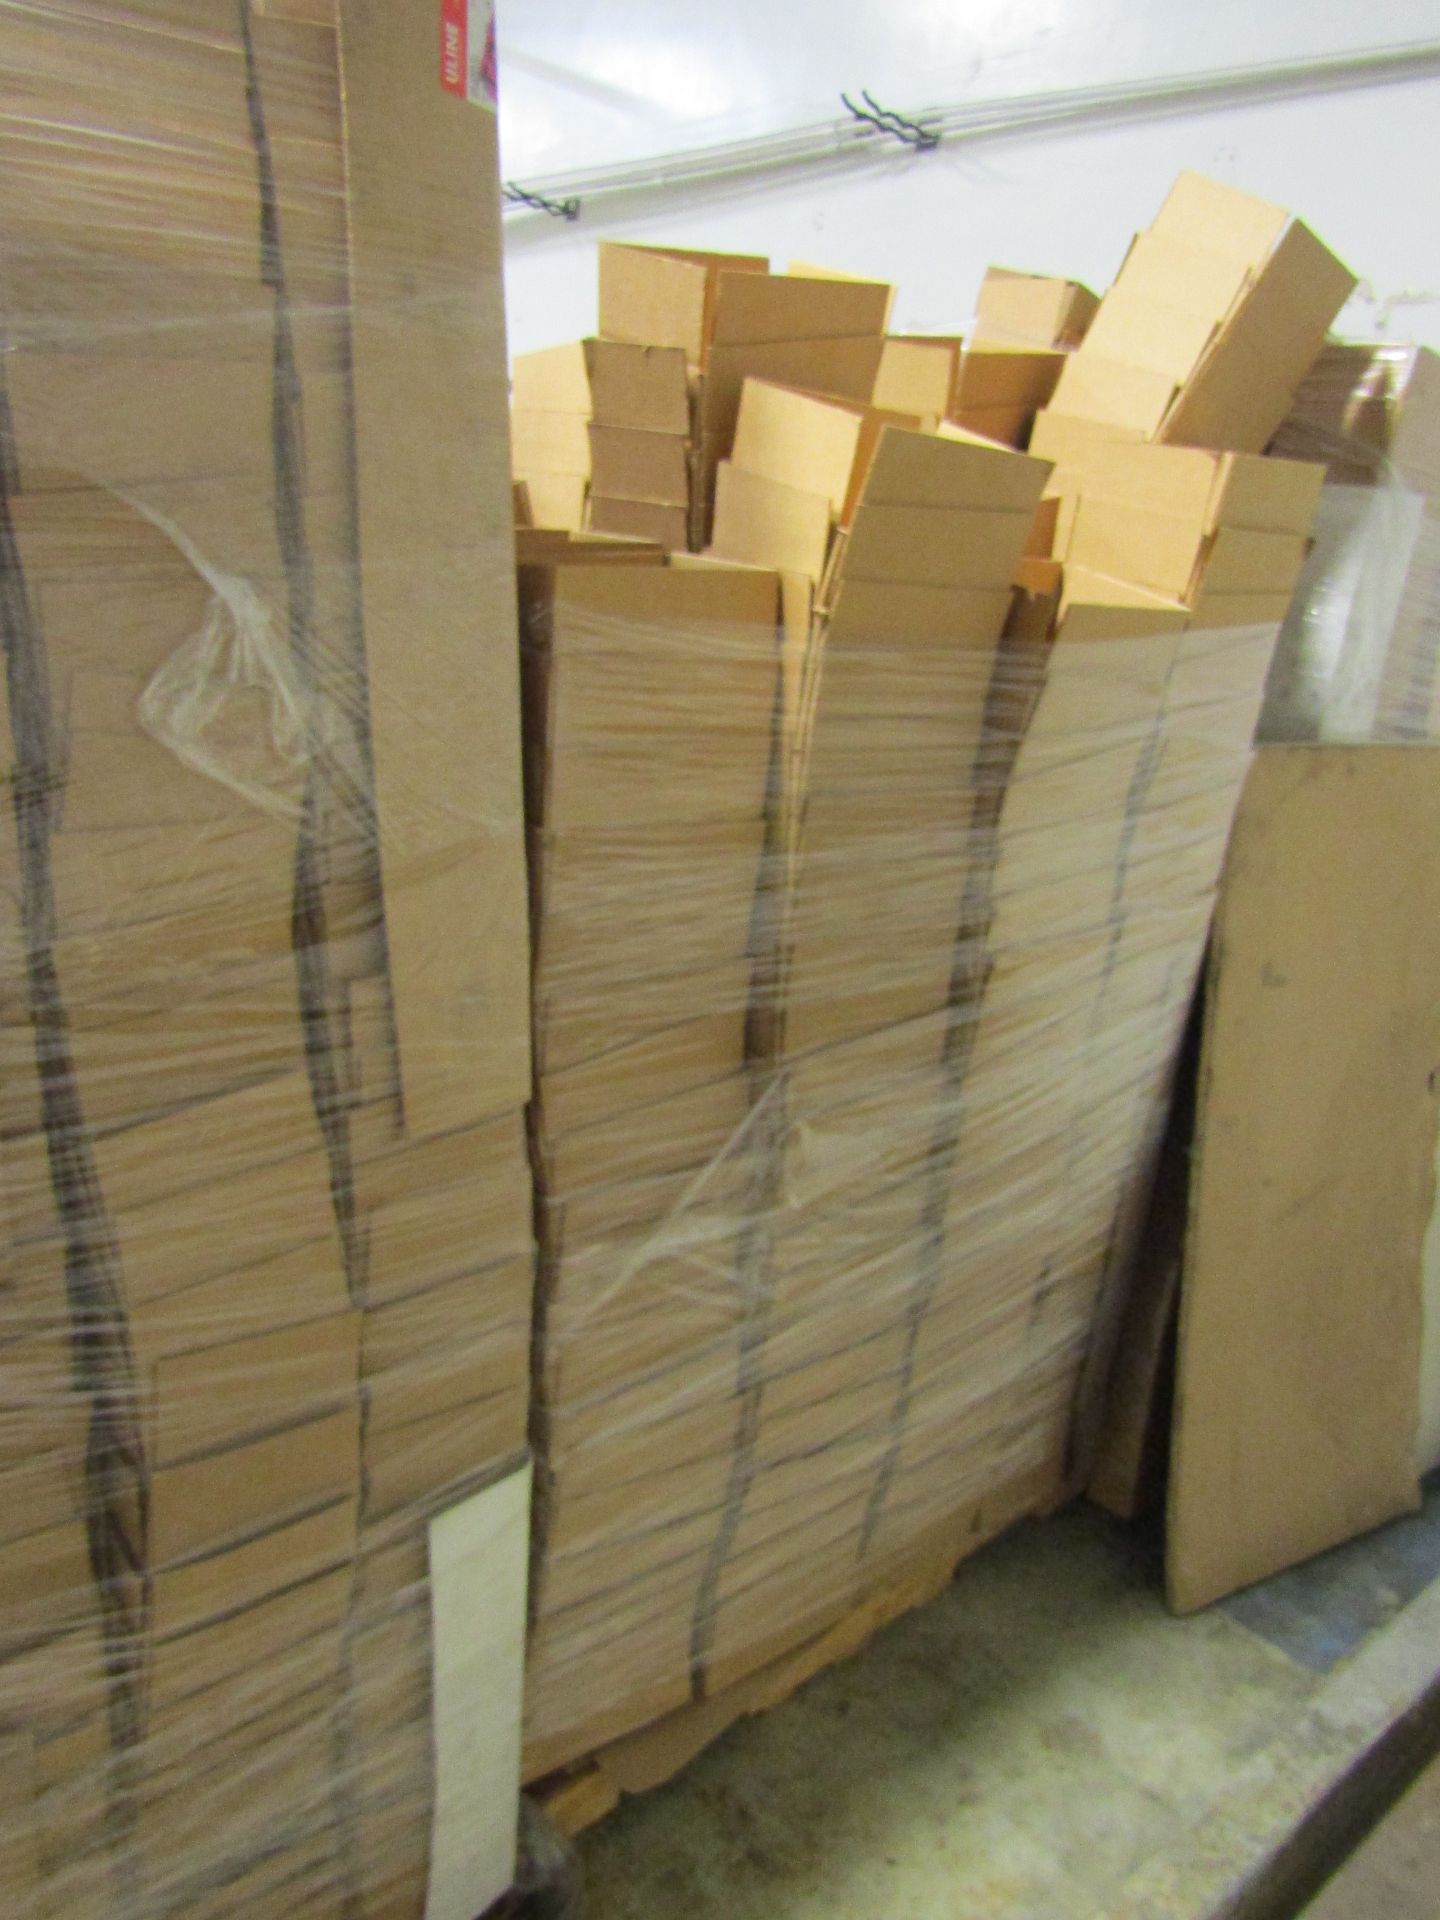 (1 Pallet) 10" X 7" X 3" Uline Boxes - Image 3 of 3